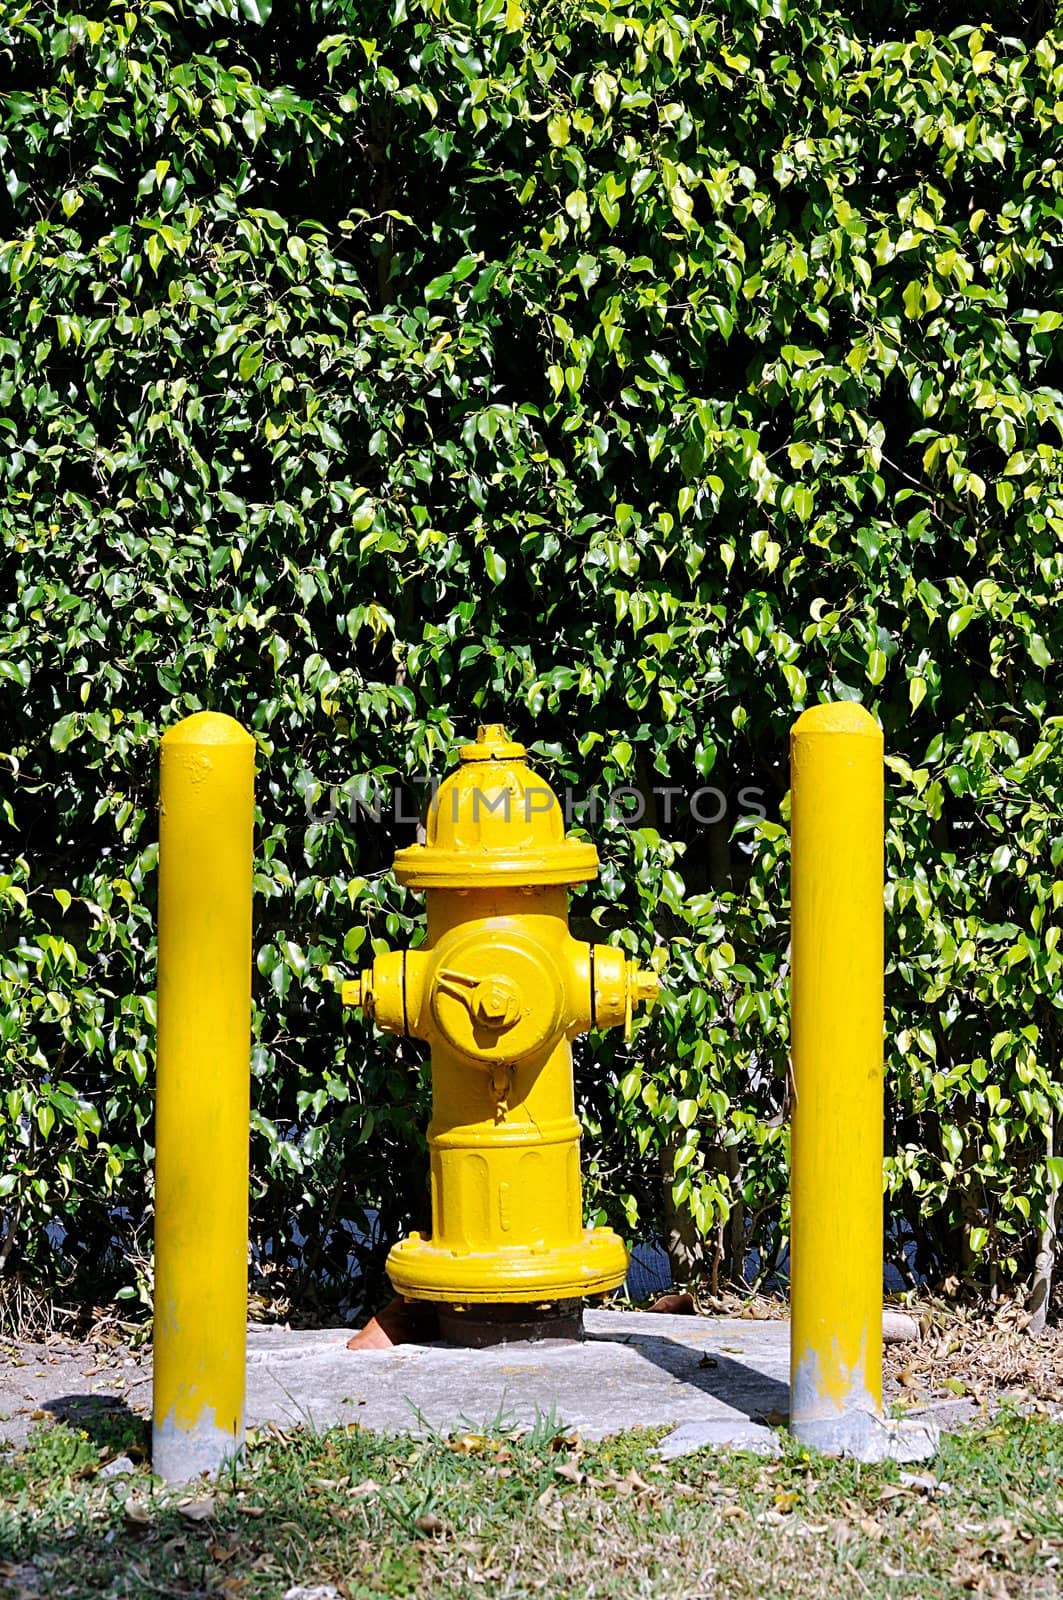 Yellow fire hydrant behind two yellow posts.